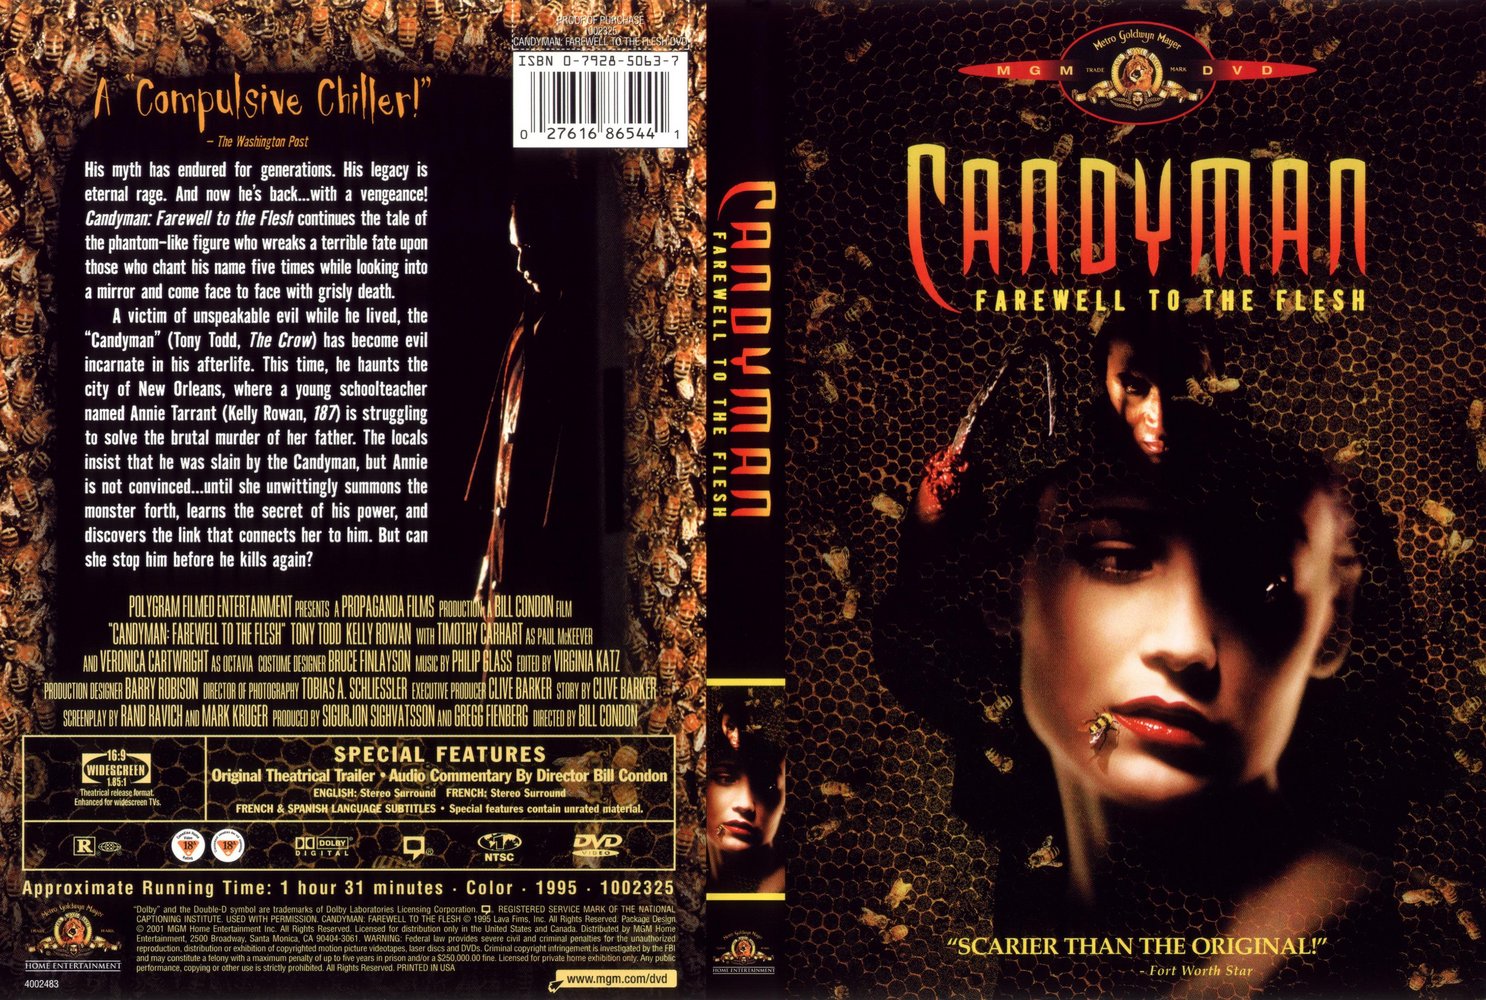 Jaquette DVD Candyman 2 Zone 1